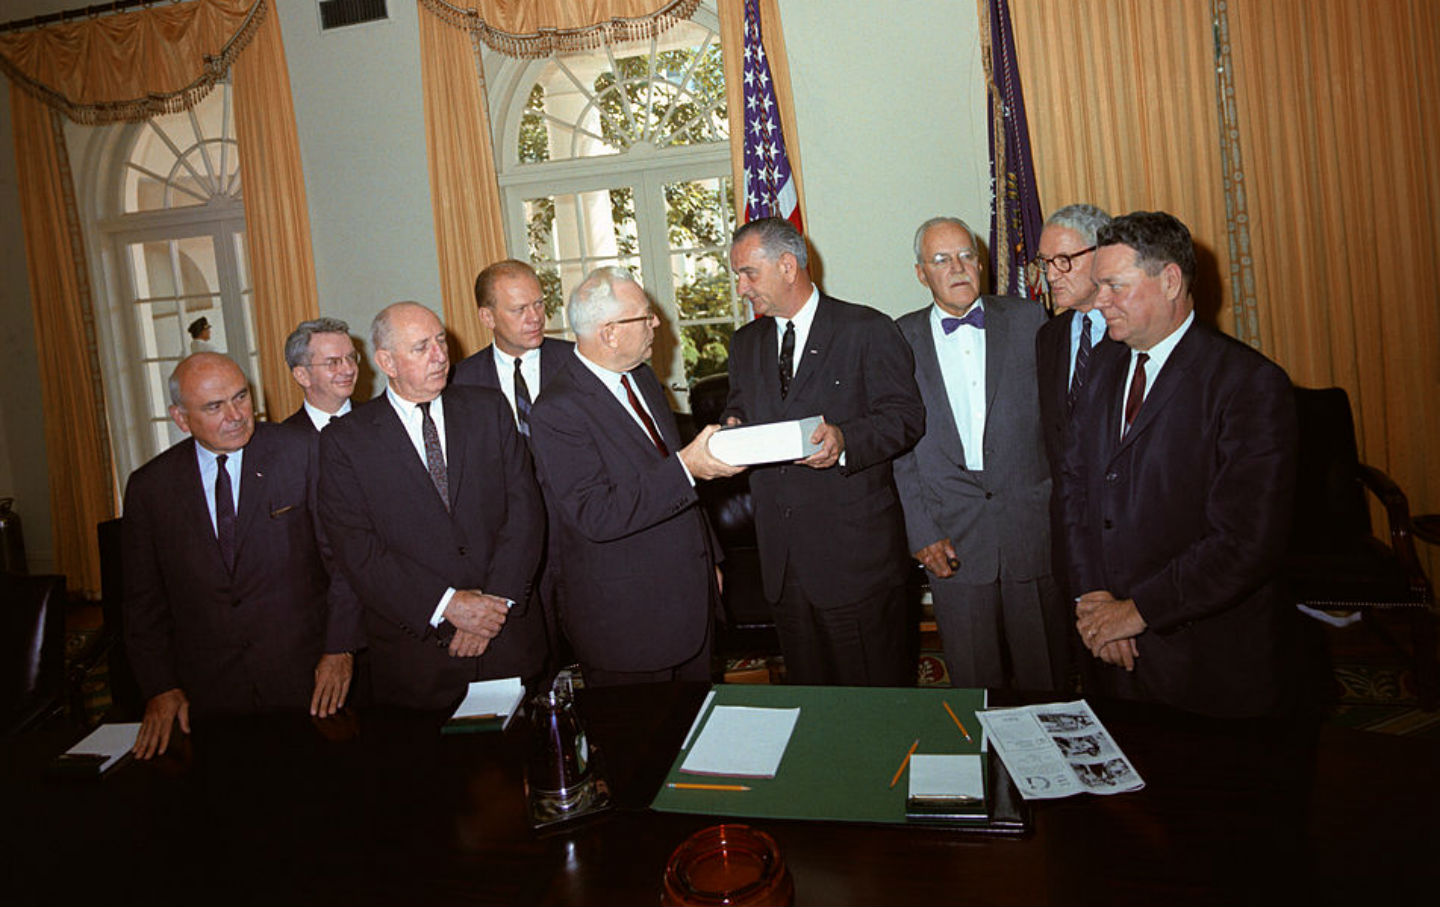 September 24, 1964: The Warren Commission Delivers Its Final Report to President Lyndon Johnson